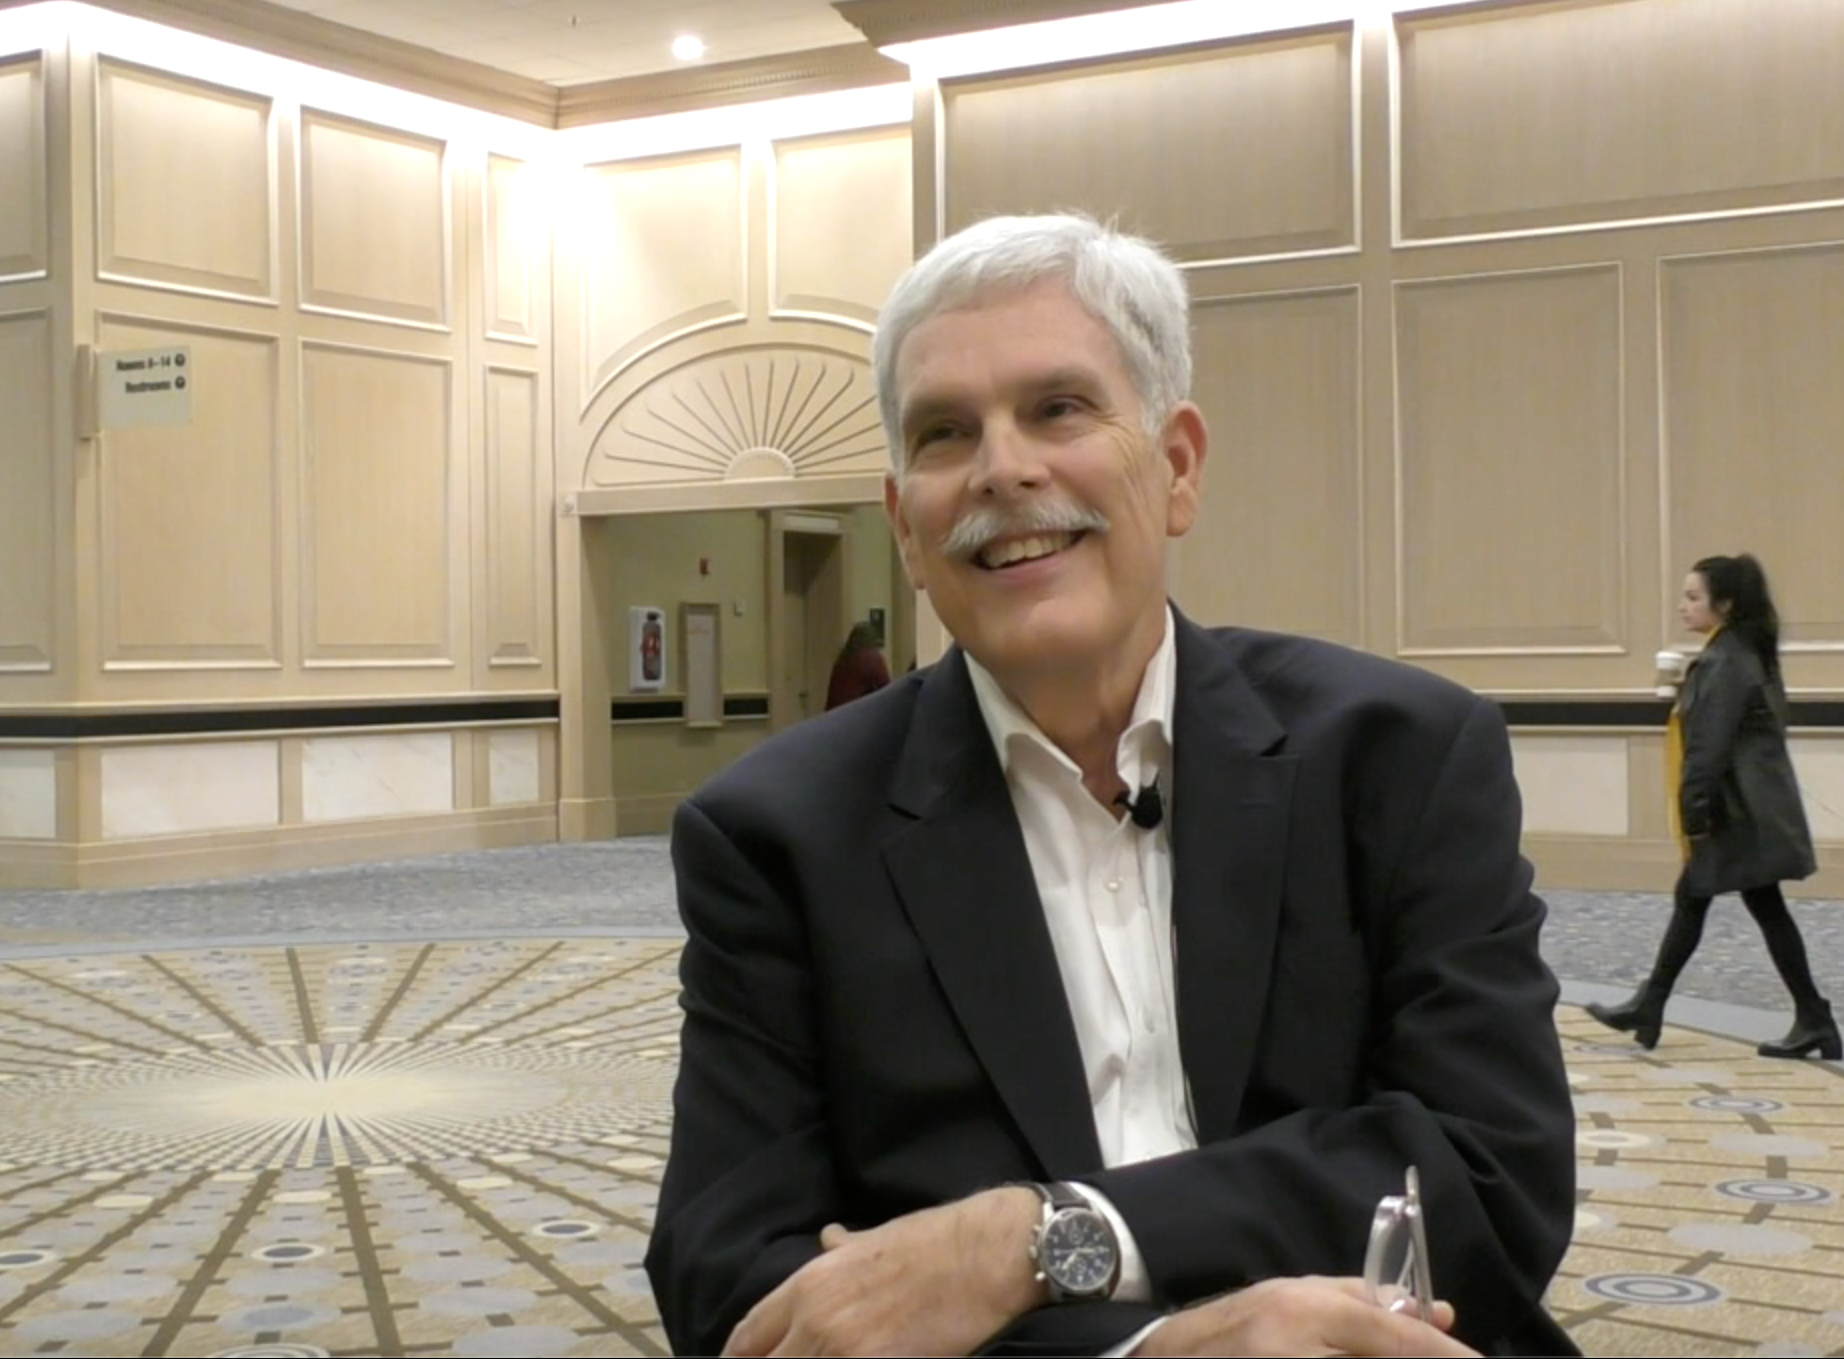 Frank Lavernia, MD, Talks About the Reduced Risk of MACE With GLP-1 RAs